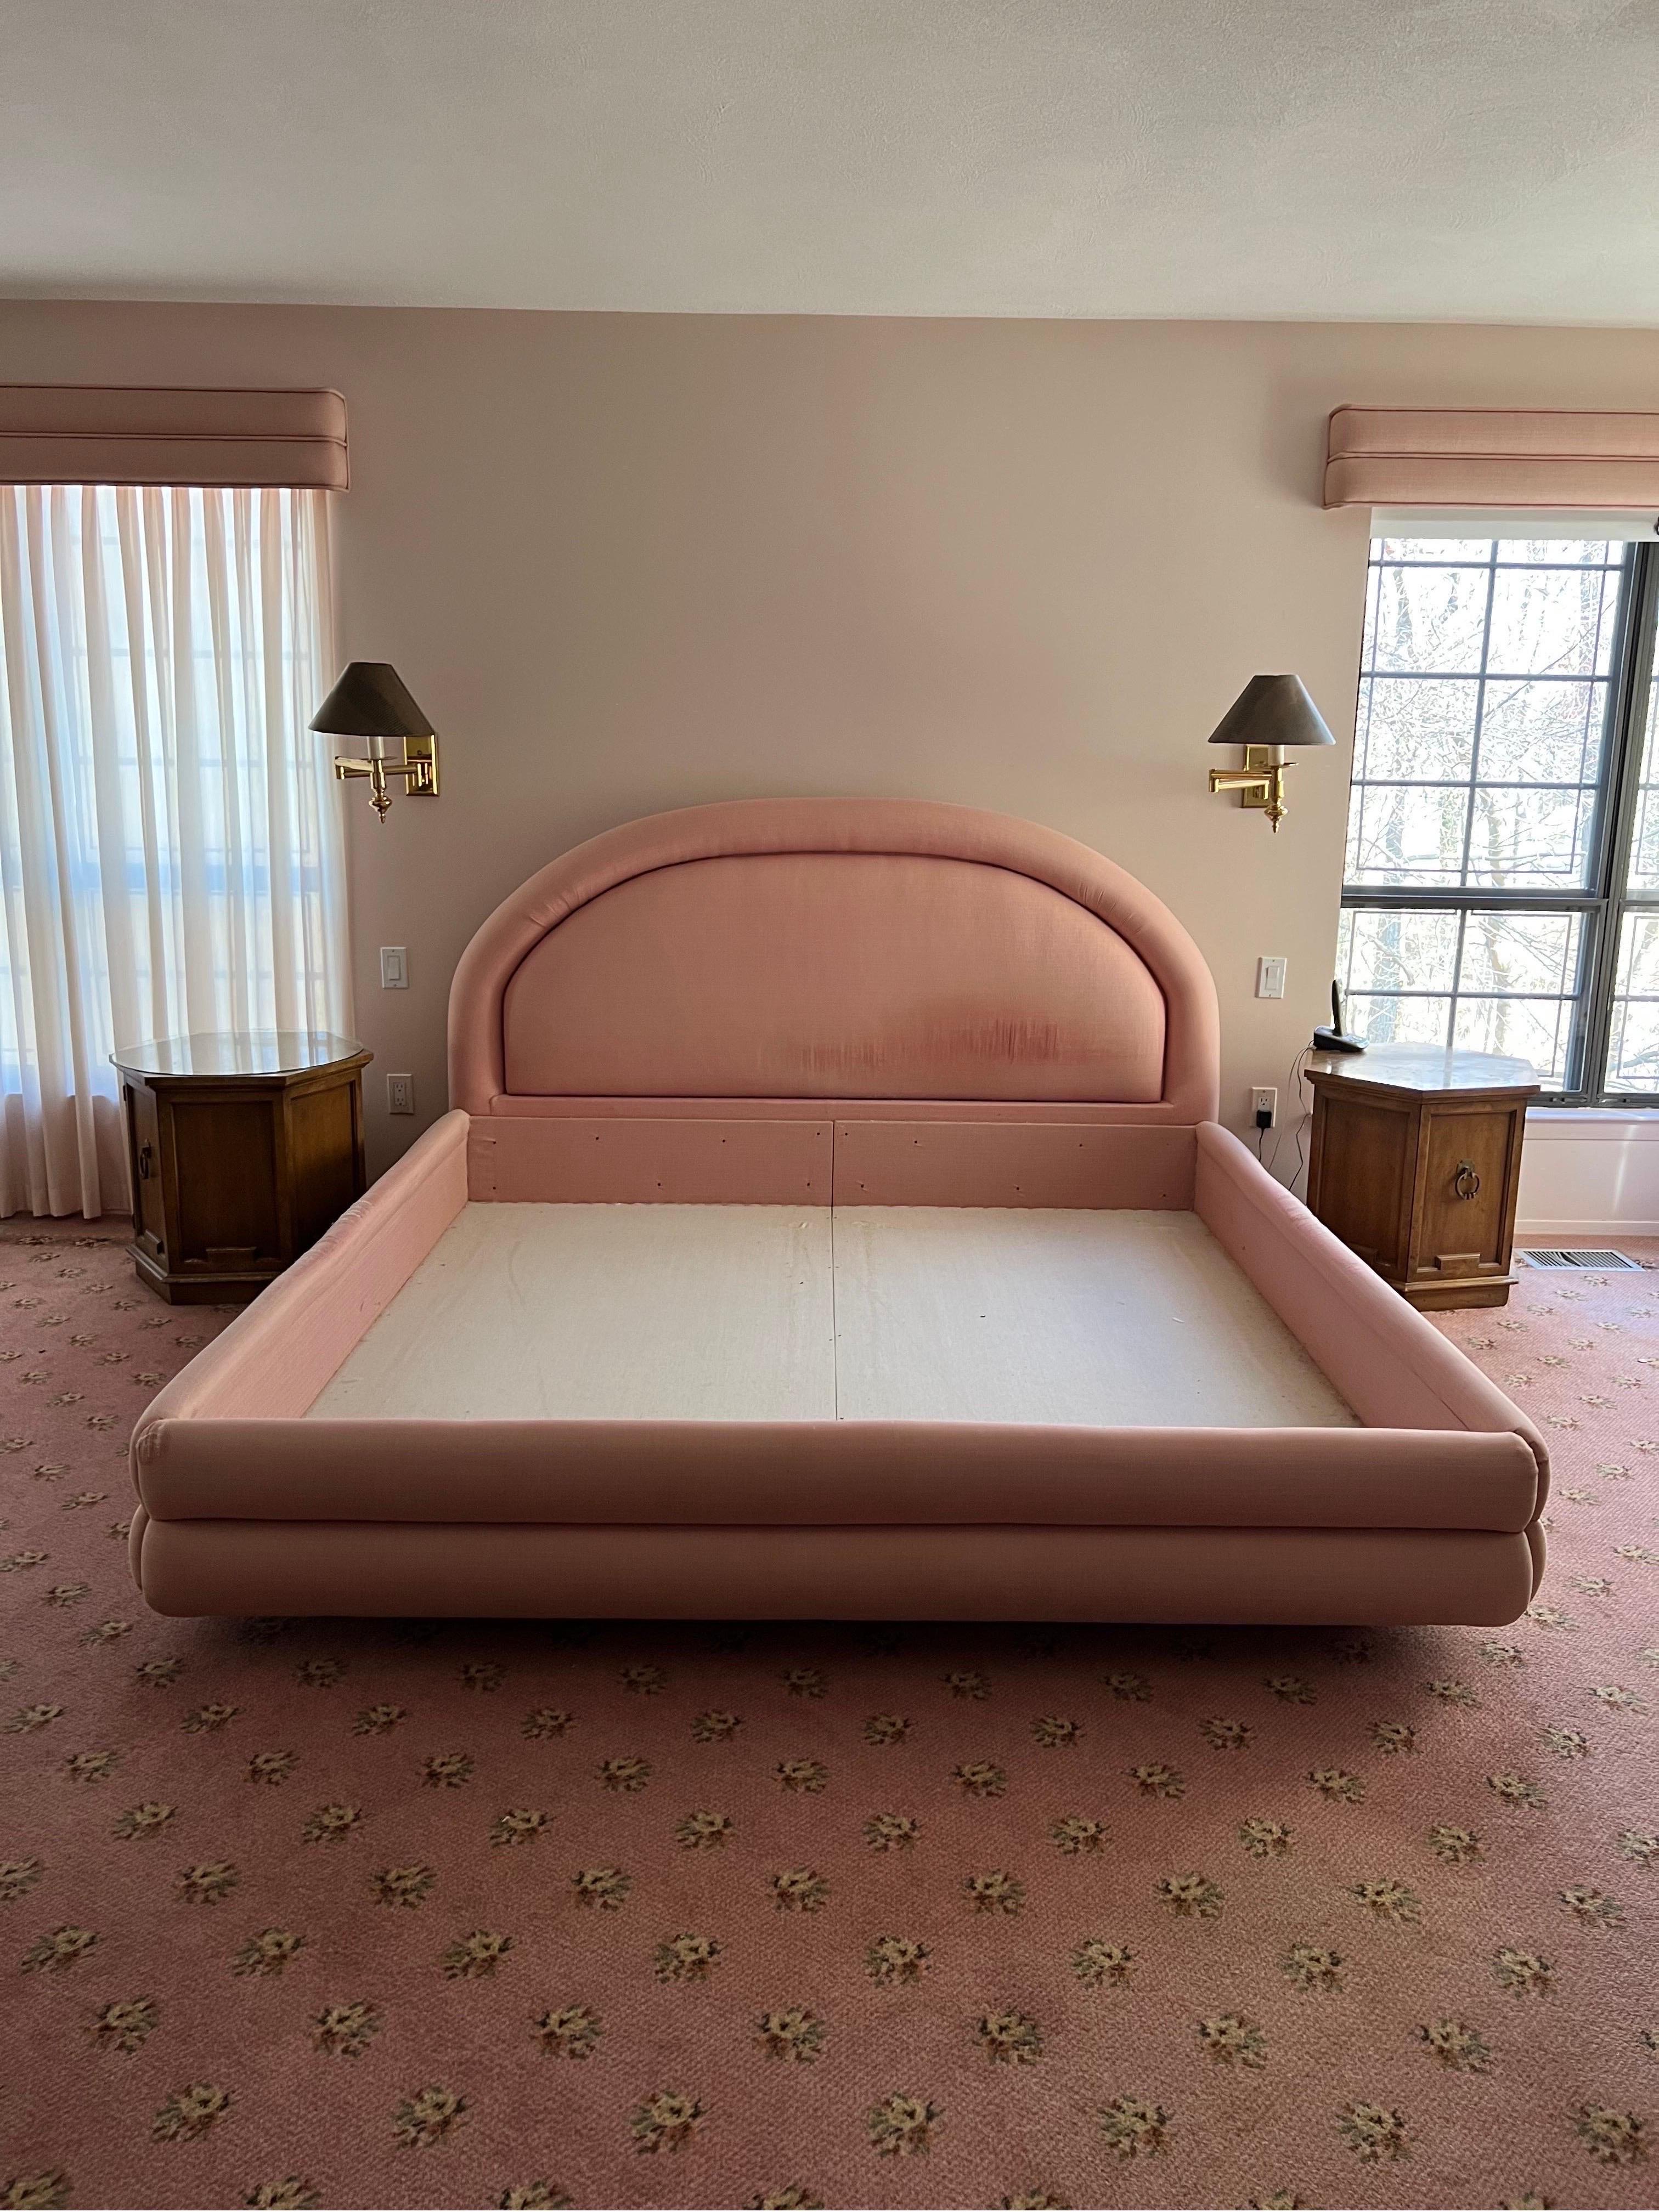 Postmodern upholstery fabric pink king platform bed frame, custom made in 1980

Can use a reupholster but the bone and the frame are solid, very well made.

There is a platform underneath which makes the bed look like it is floating.

On the